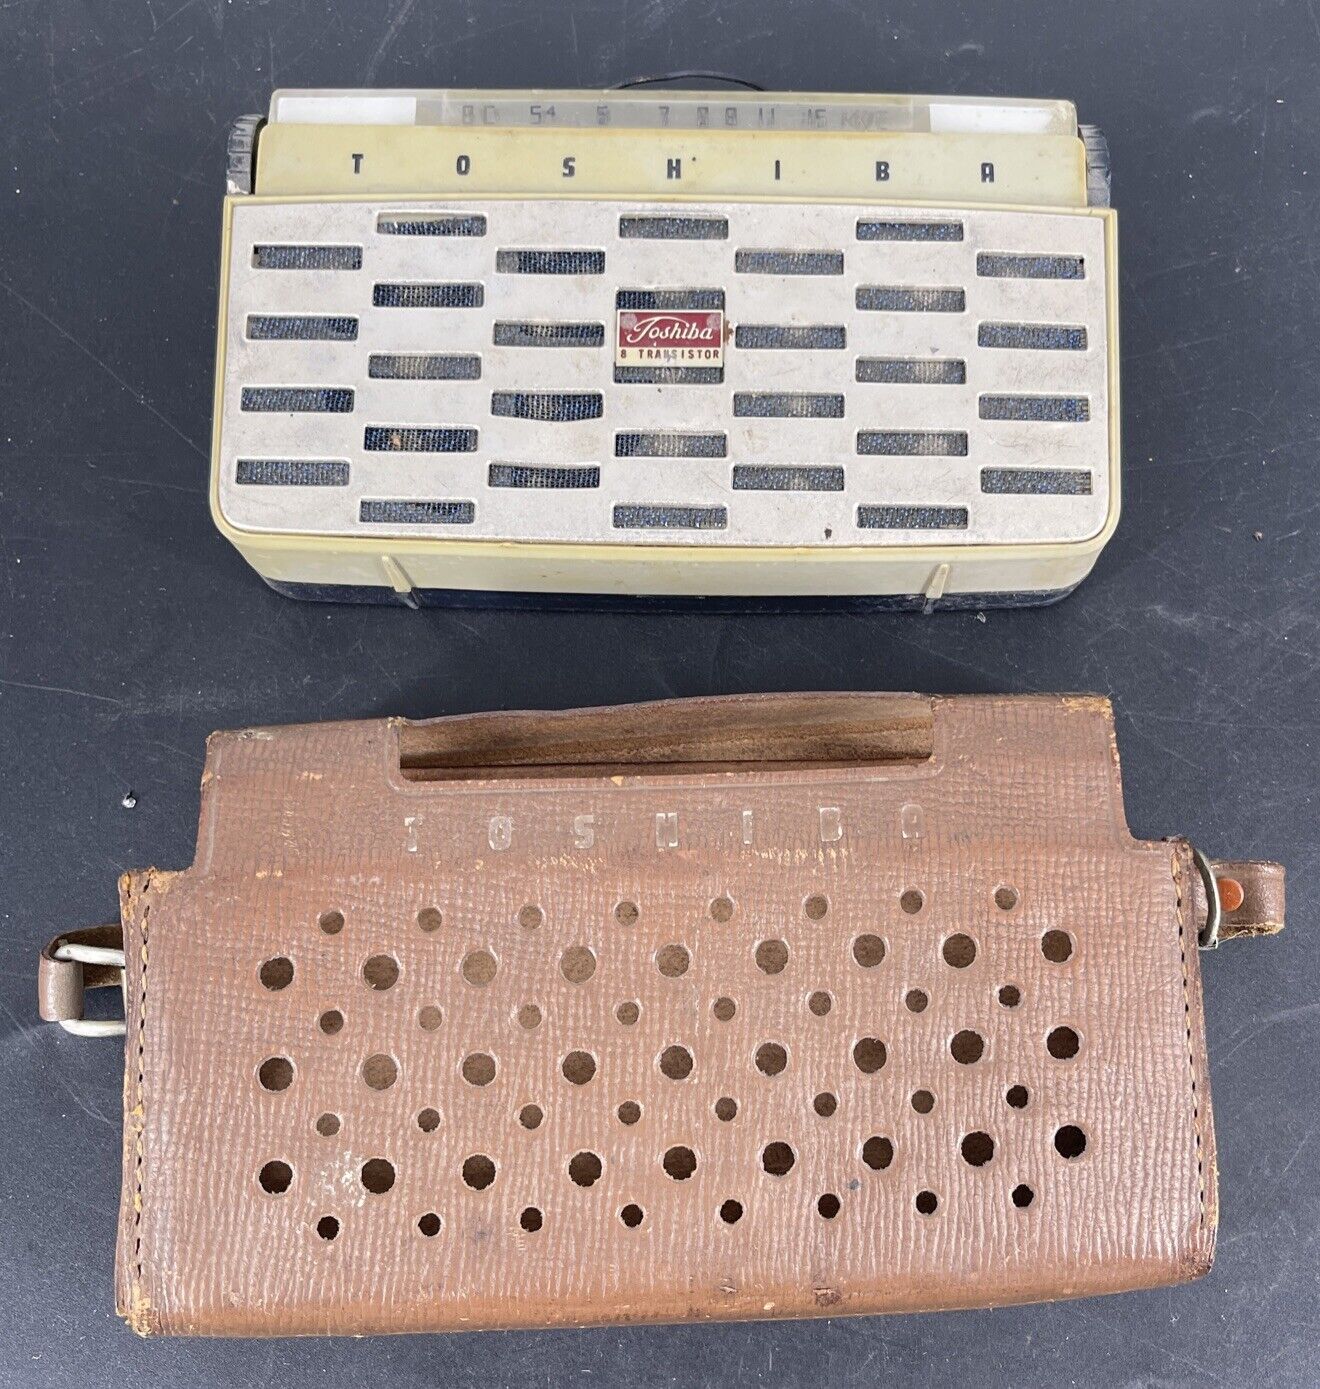 Toshiba 8TM-294 Transistor Radio from 1959-with OEM Protective Snap Case